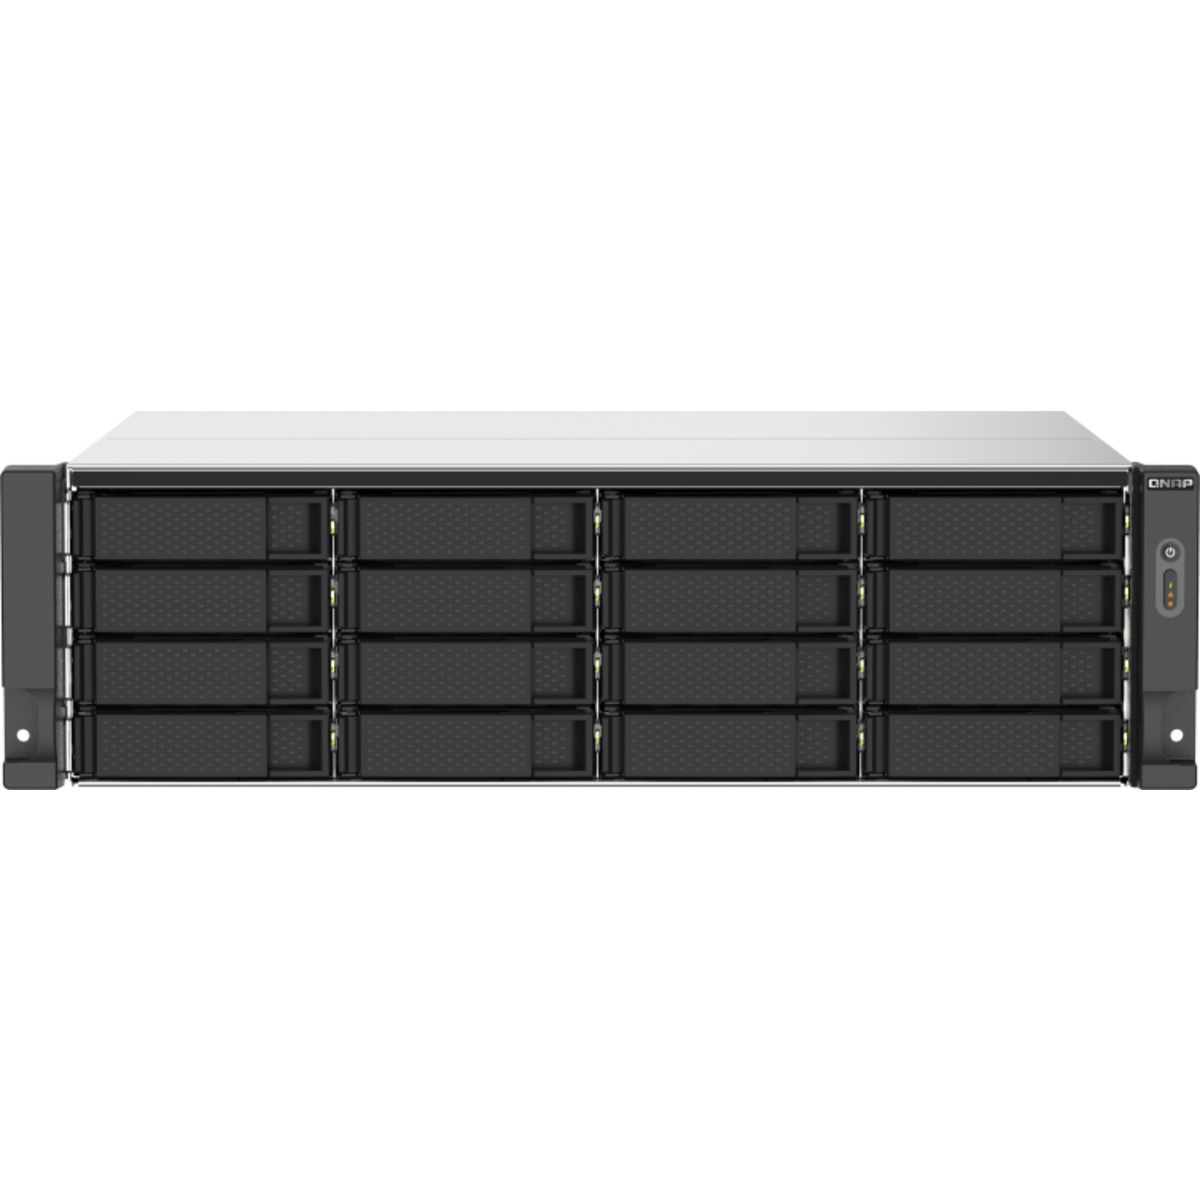 QNAP TS-1673AU-RP 352tb 16-Bay RackMount Multimedia / Power User / Business NAS - Network Attached Storage Device 16x22tb Western Digital Red Pro WD221KFGX 3.5 7200rpm SATA 6Gb/s HDD NAS Class Drives Installed - Burn-In Tested - FREE RAM UPGRADE TS-1673AU-RP